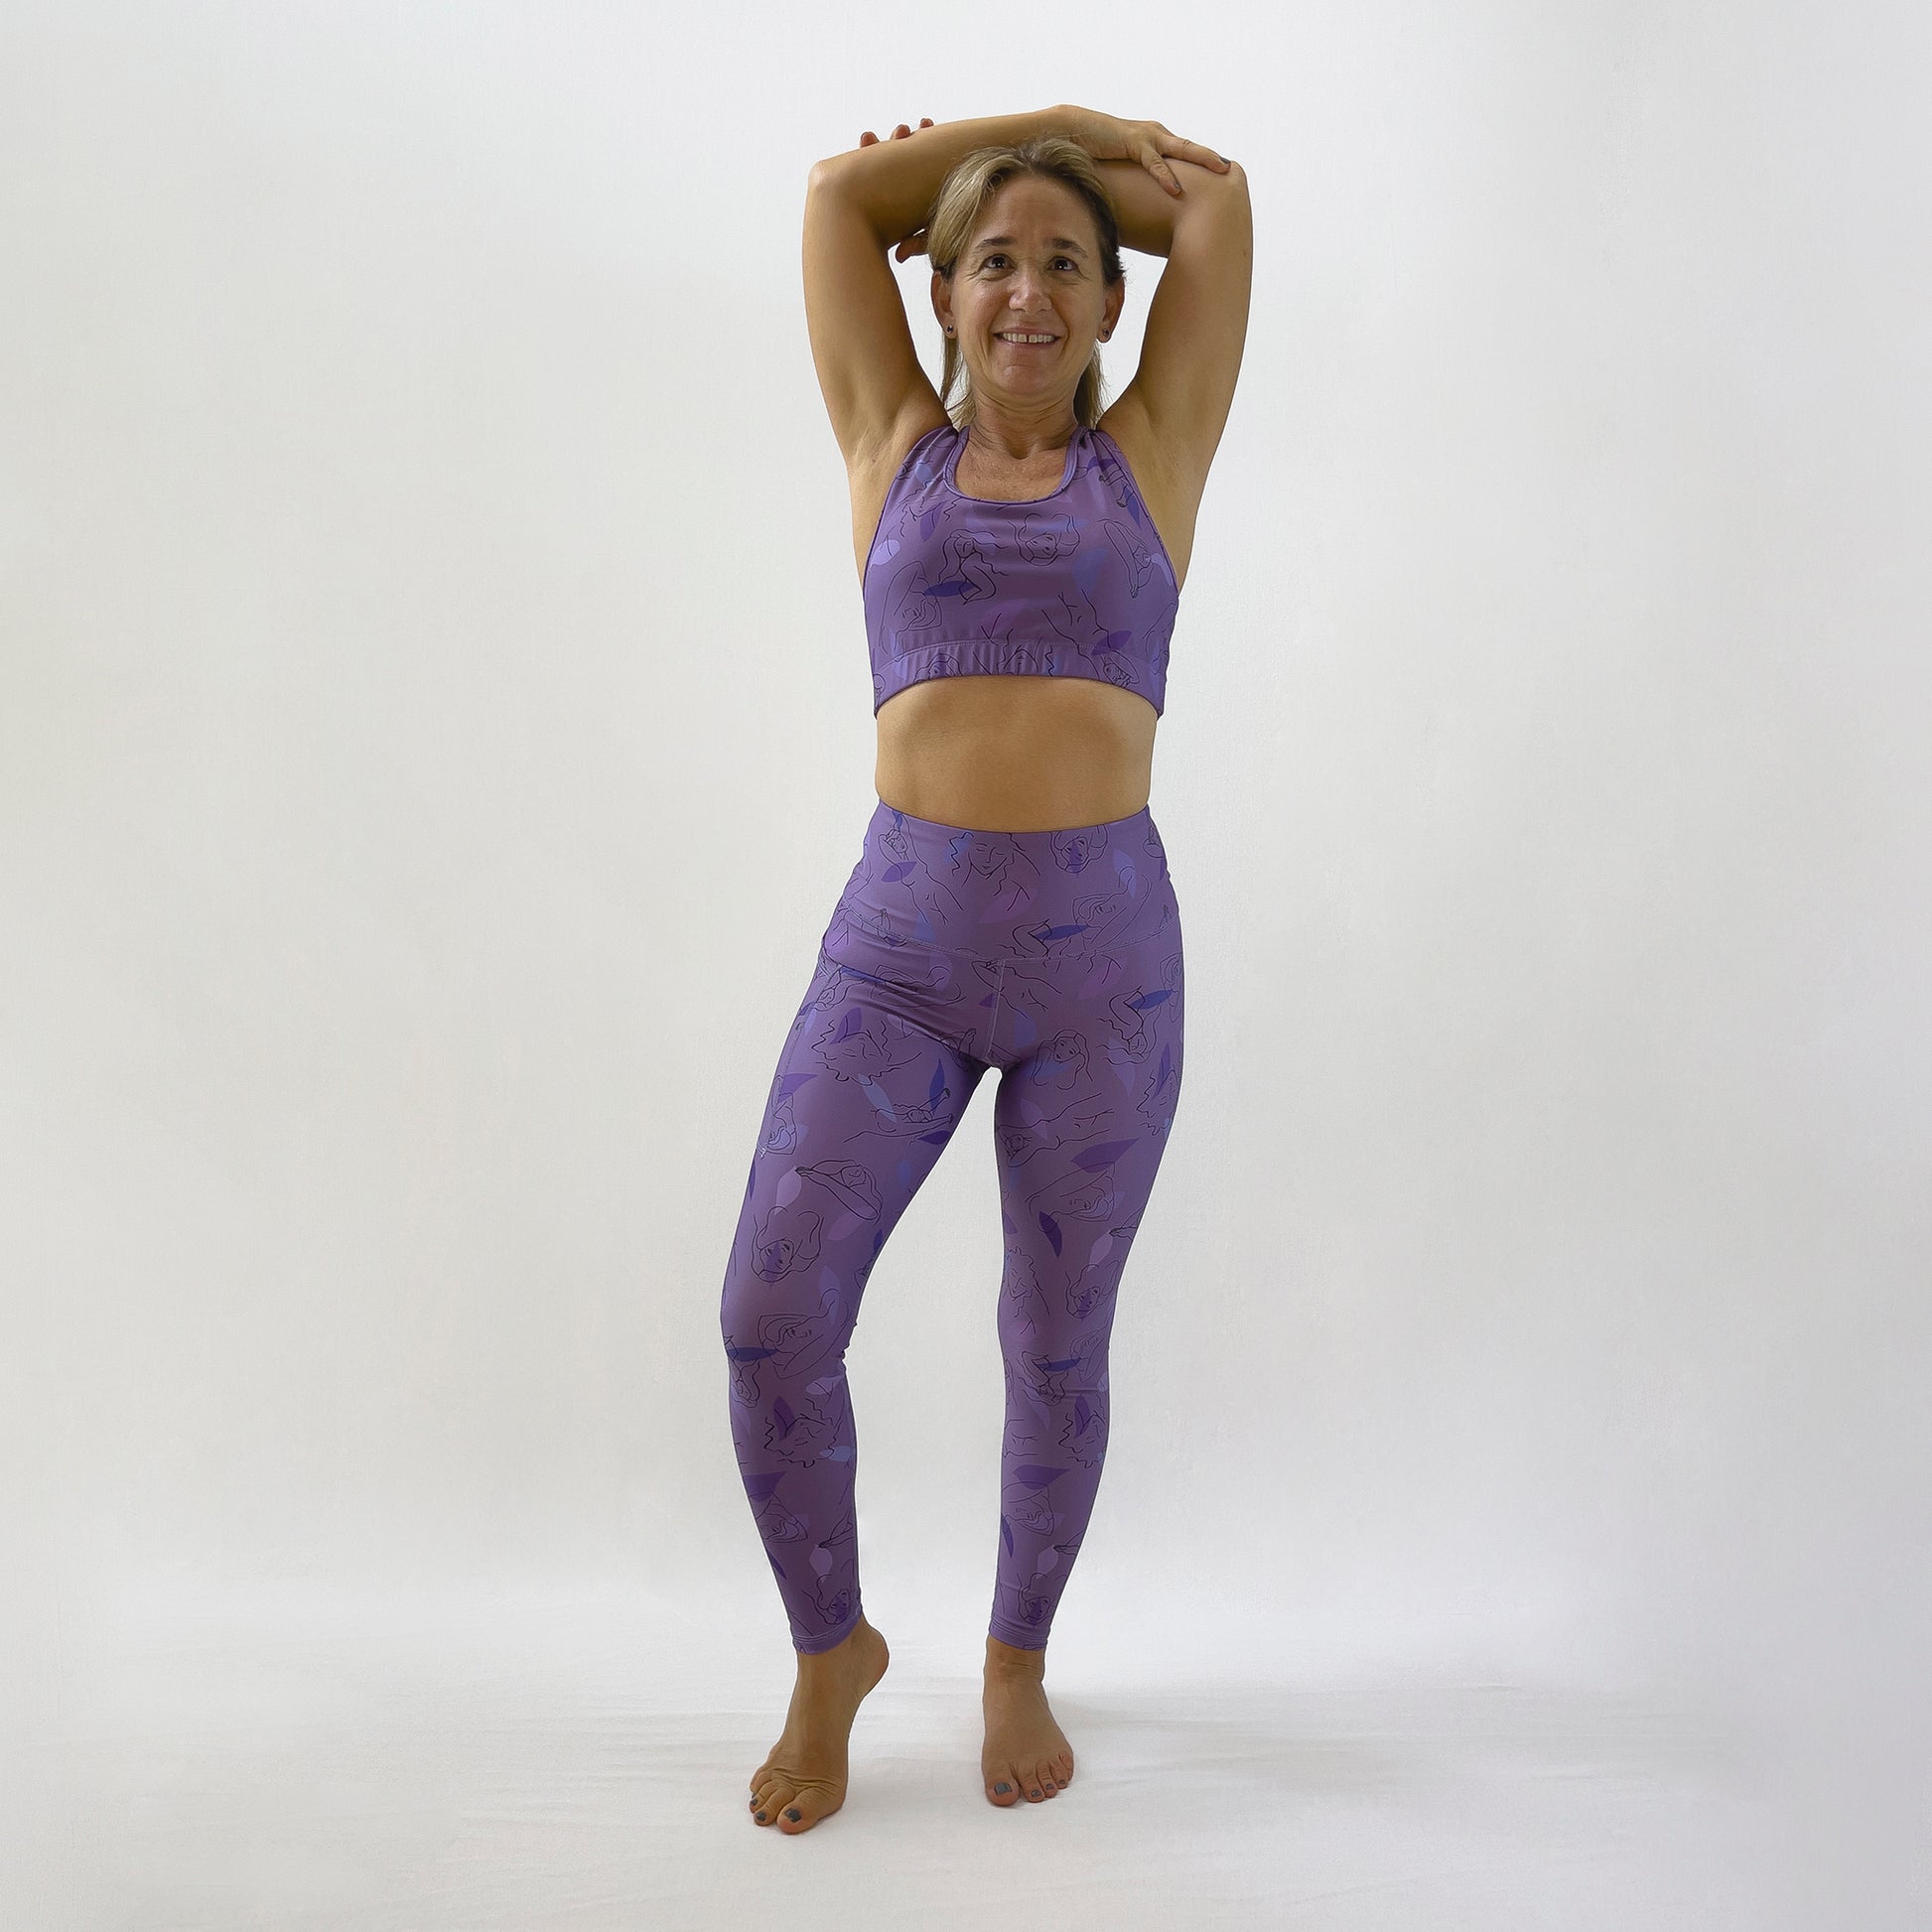 colourful high rise leggings with pockets made sustainably from recycled materials - purple women - full body